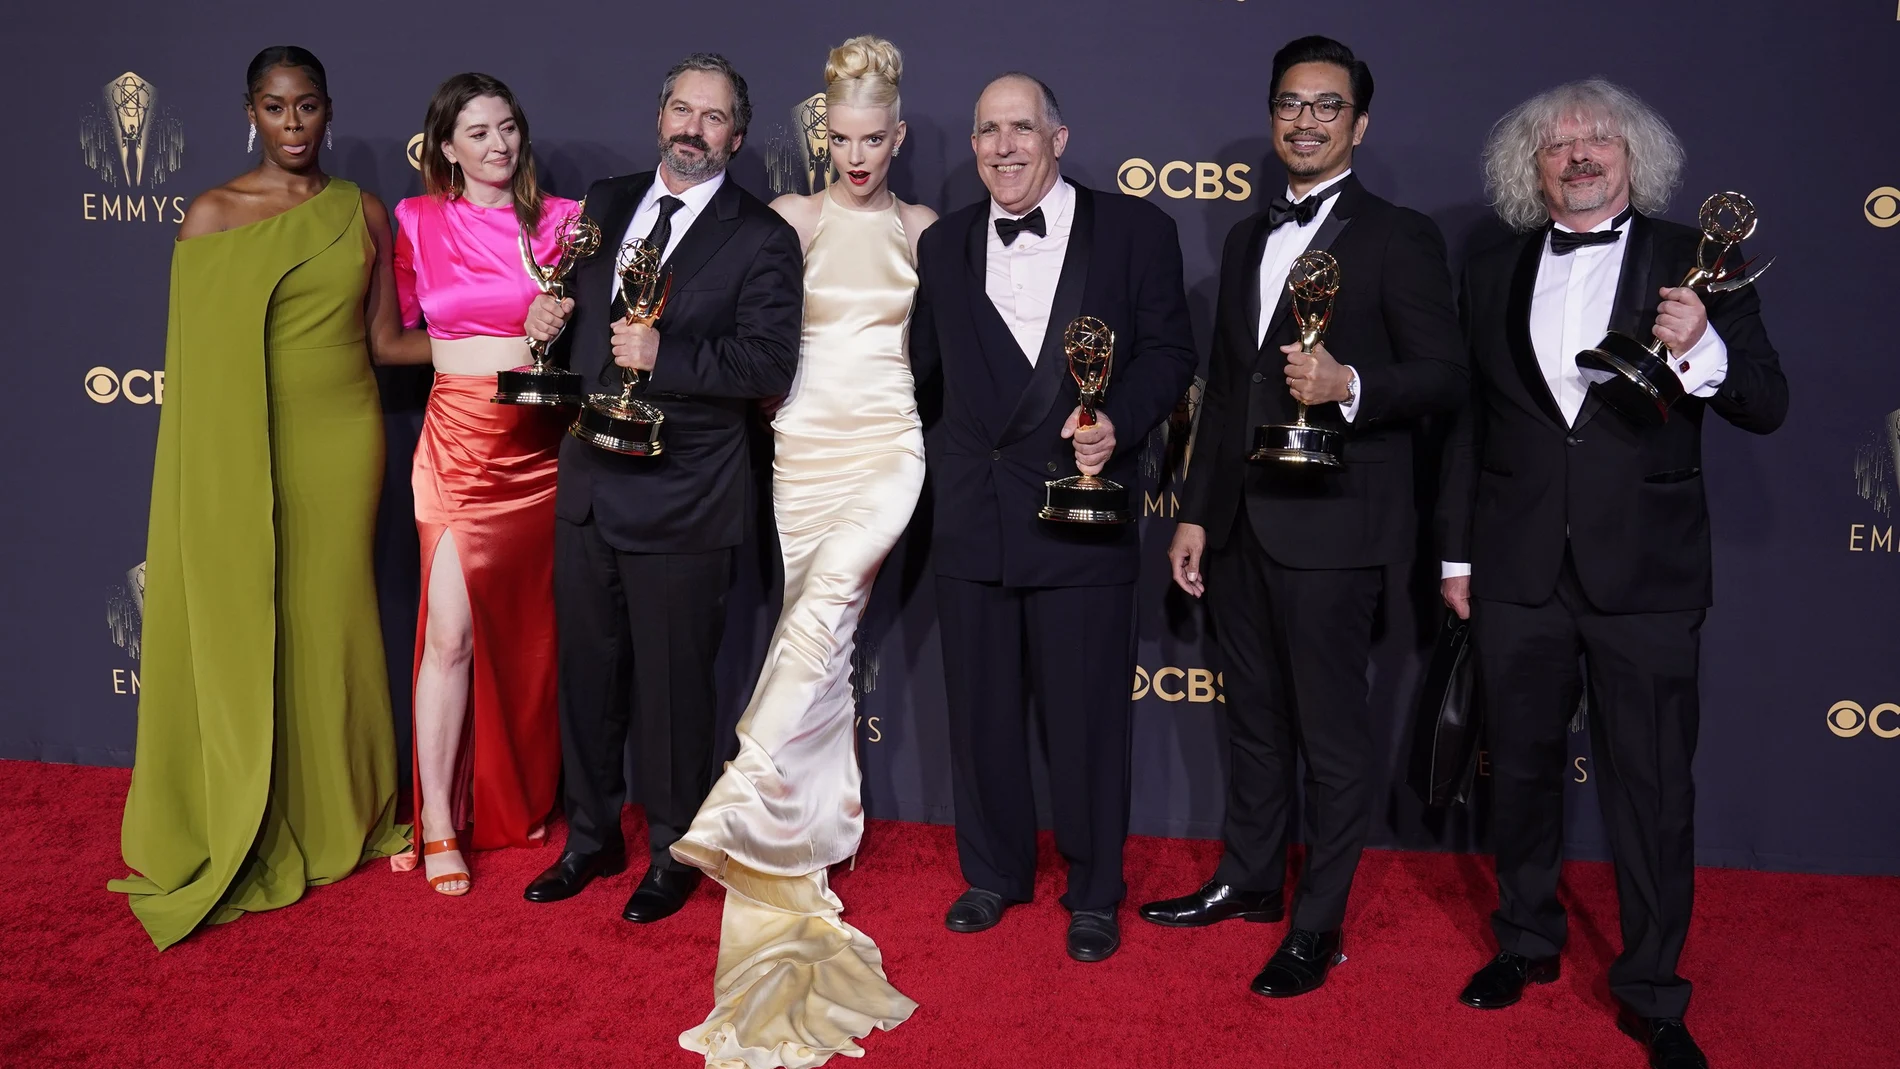 Moses Ingram, from left, Marielle Heller, Scott Frank, Anya Taylor-Joy, William Horberg, Mick Aniceto and Marcus Loges, winners of the award for outstanding directing for a limited or anthology series or movie for "The Queen's Gambit", pose at the 73rd Primetime Emmy Awards on Sunday, Sept. 19, 2021, at L.A. Live in Los Angeles. (AP Photo/Chris Pizzello)